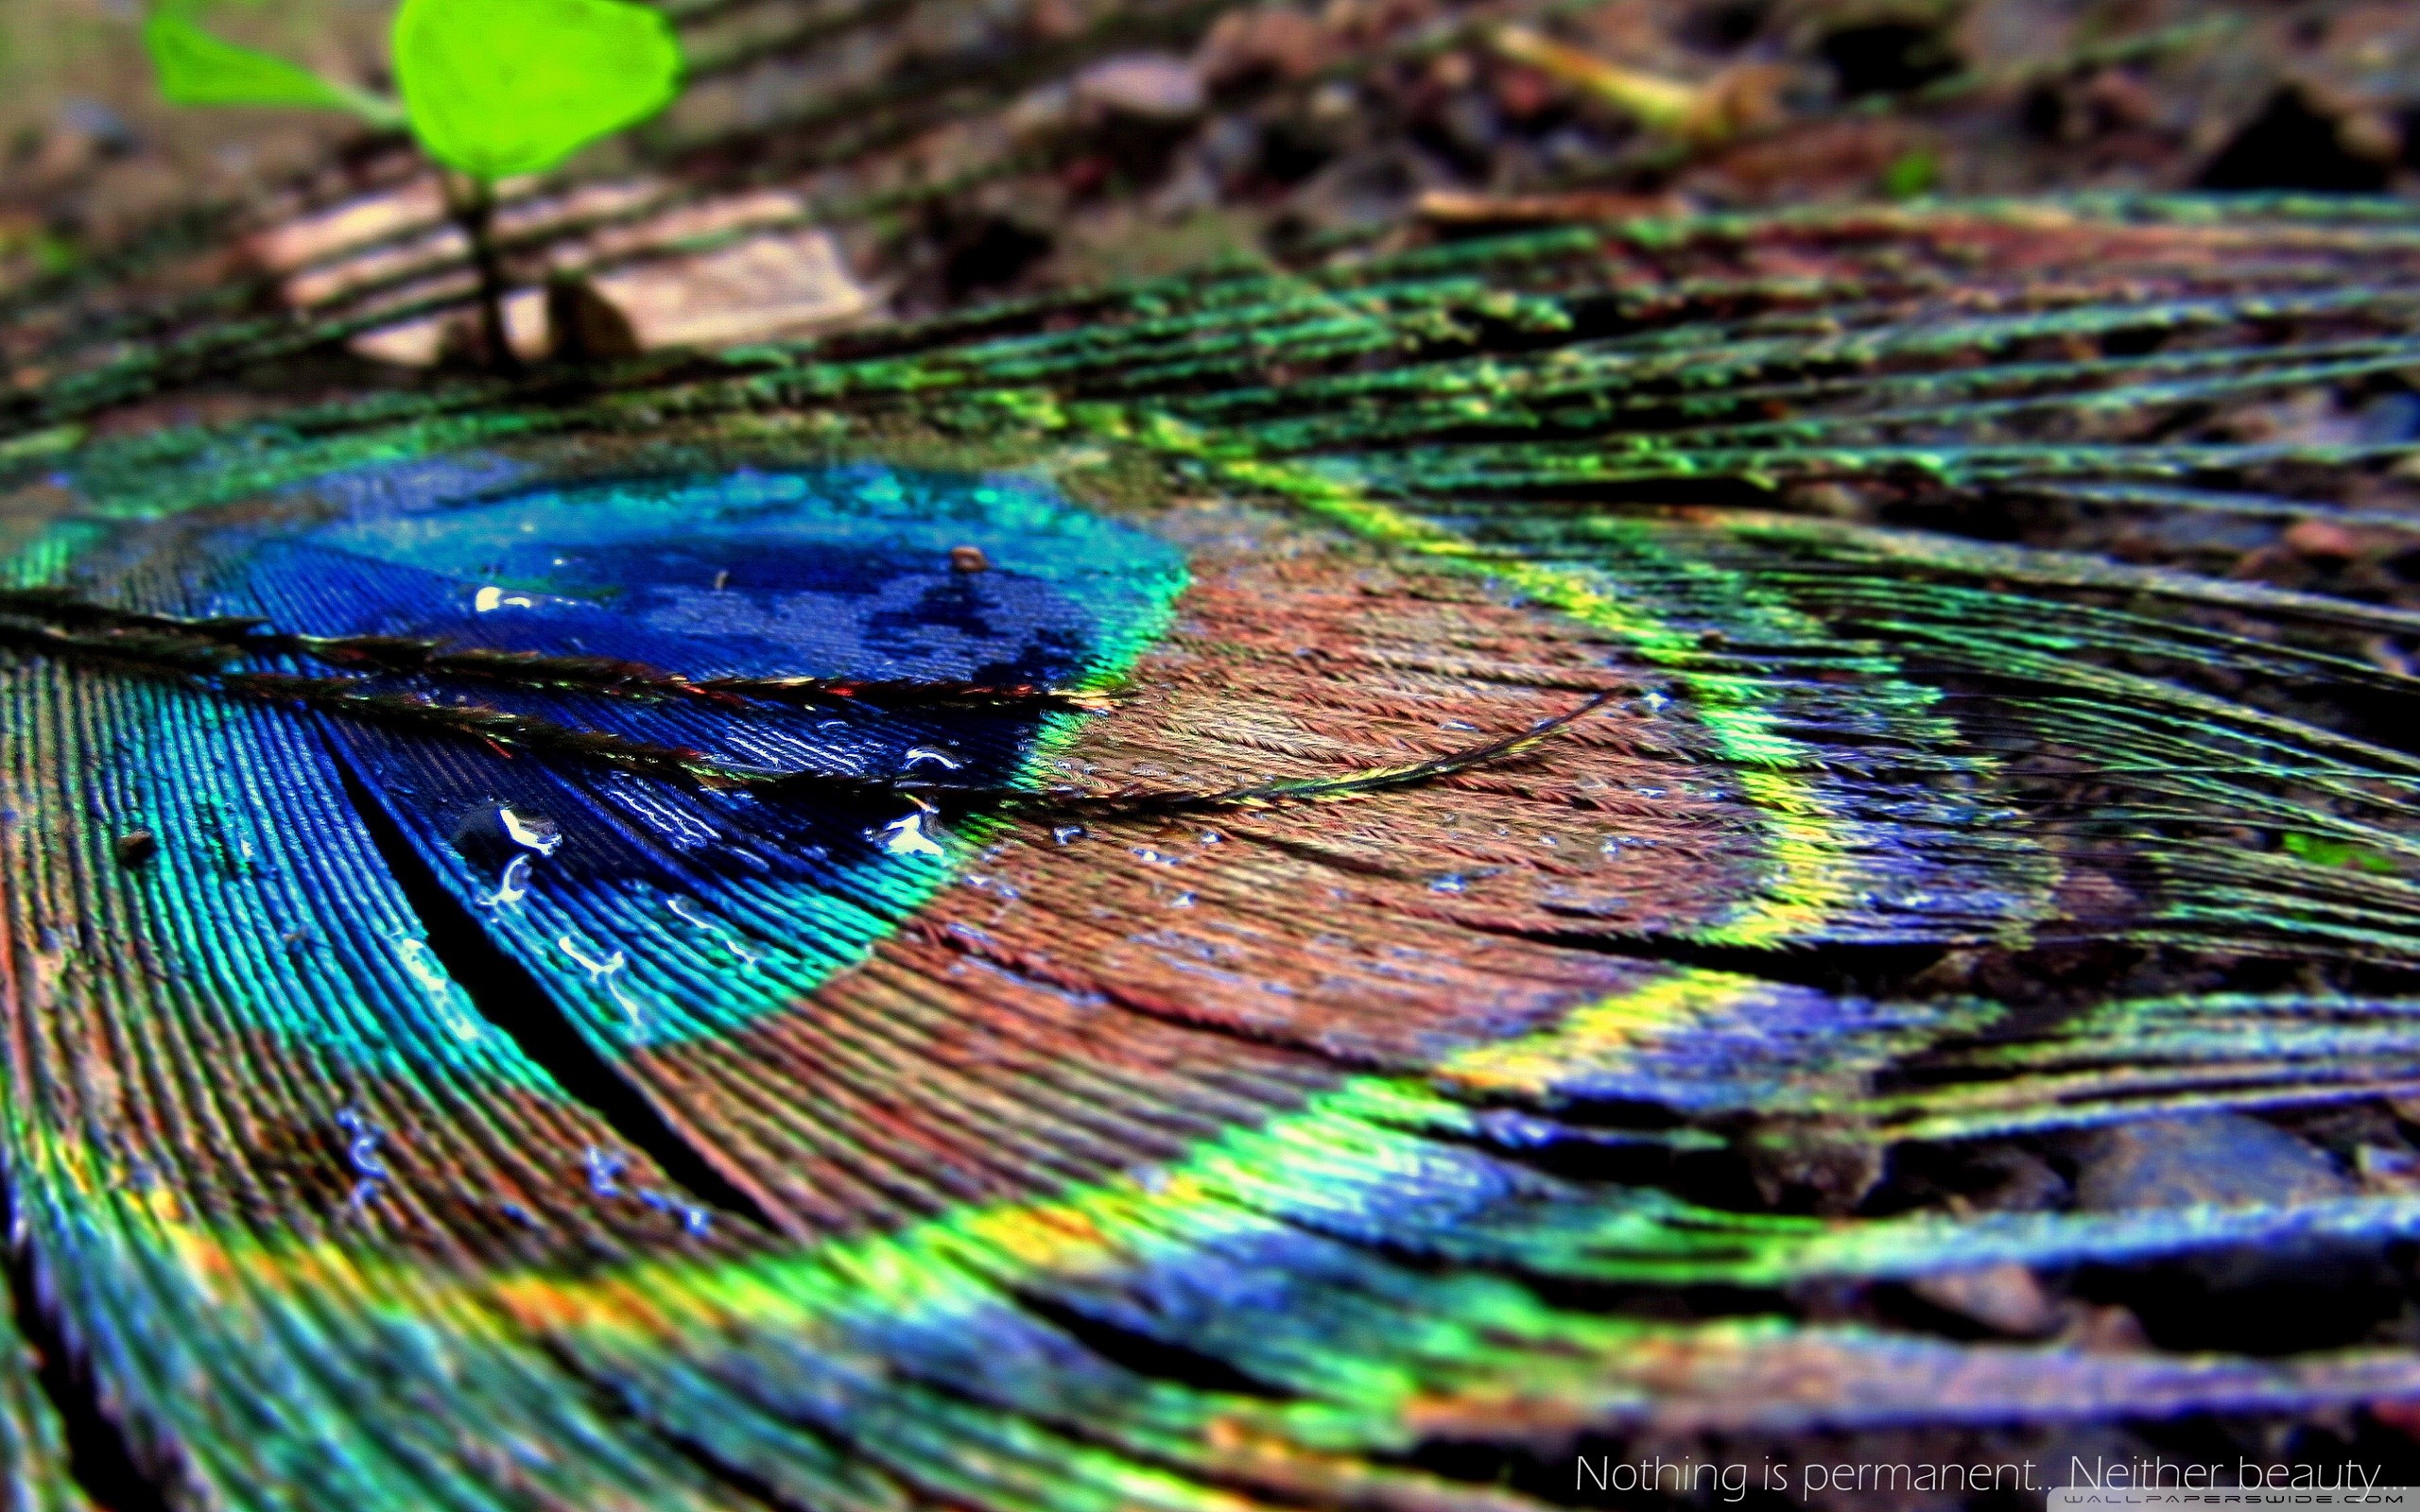 350+ Peacock Feather Pictures | Download Free Images on Unsplash